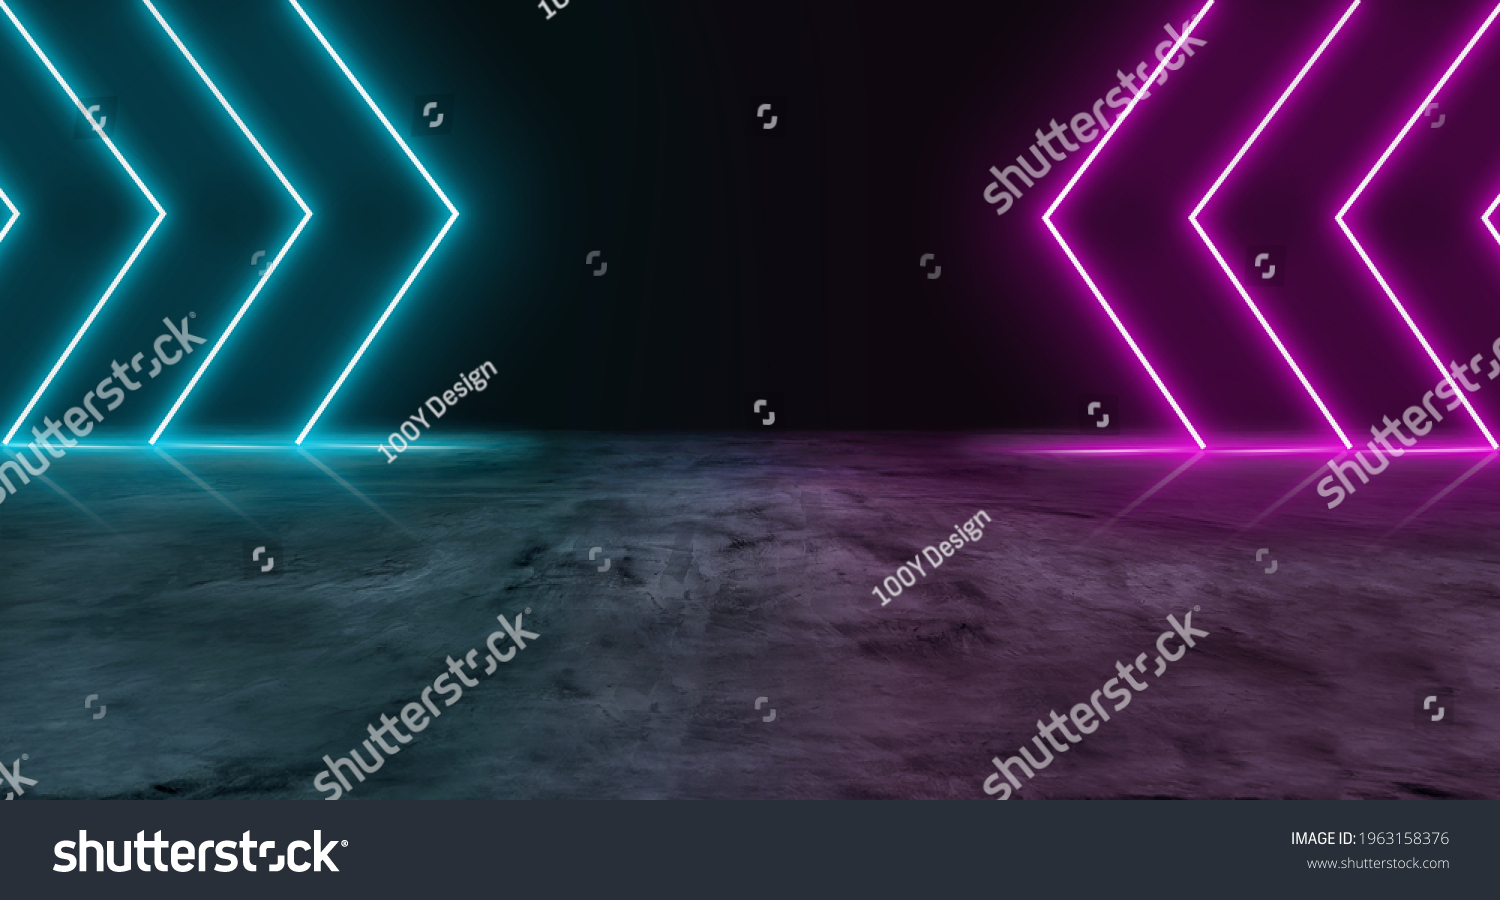 Blue and purple neon light on concrete cement floor and black background studio, Abstract high-tech, technology futuristic or entertainment feeling, Empty space in middle to place product or message. #1963158376